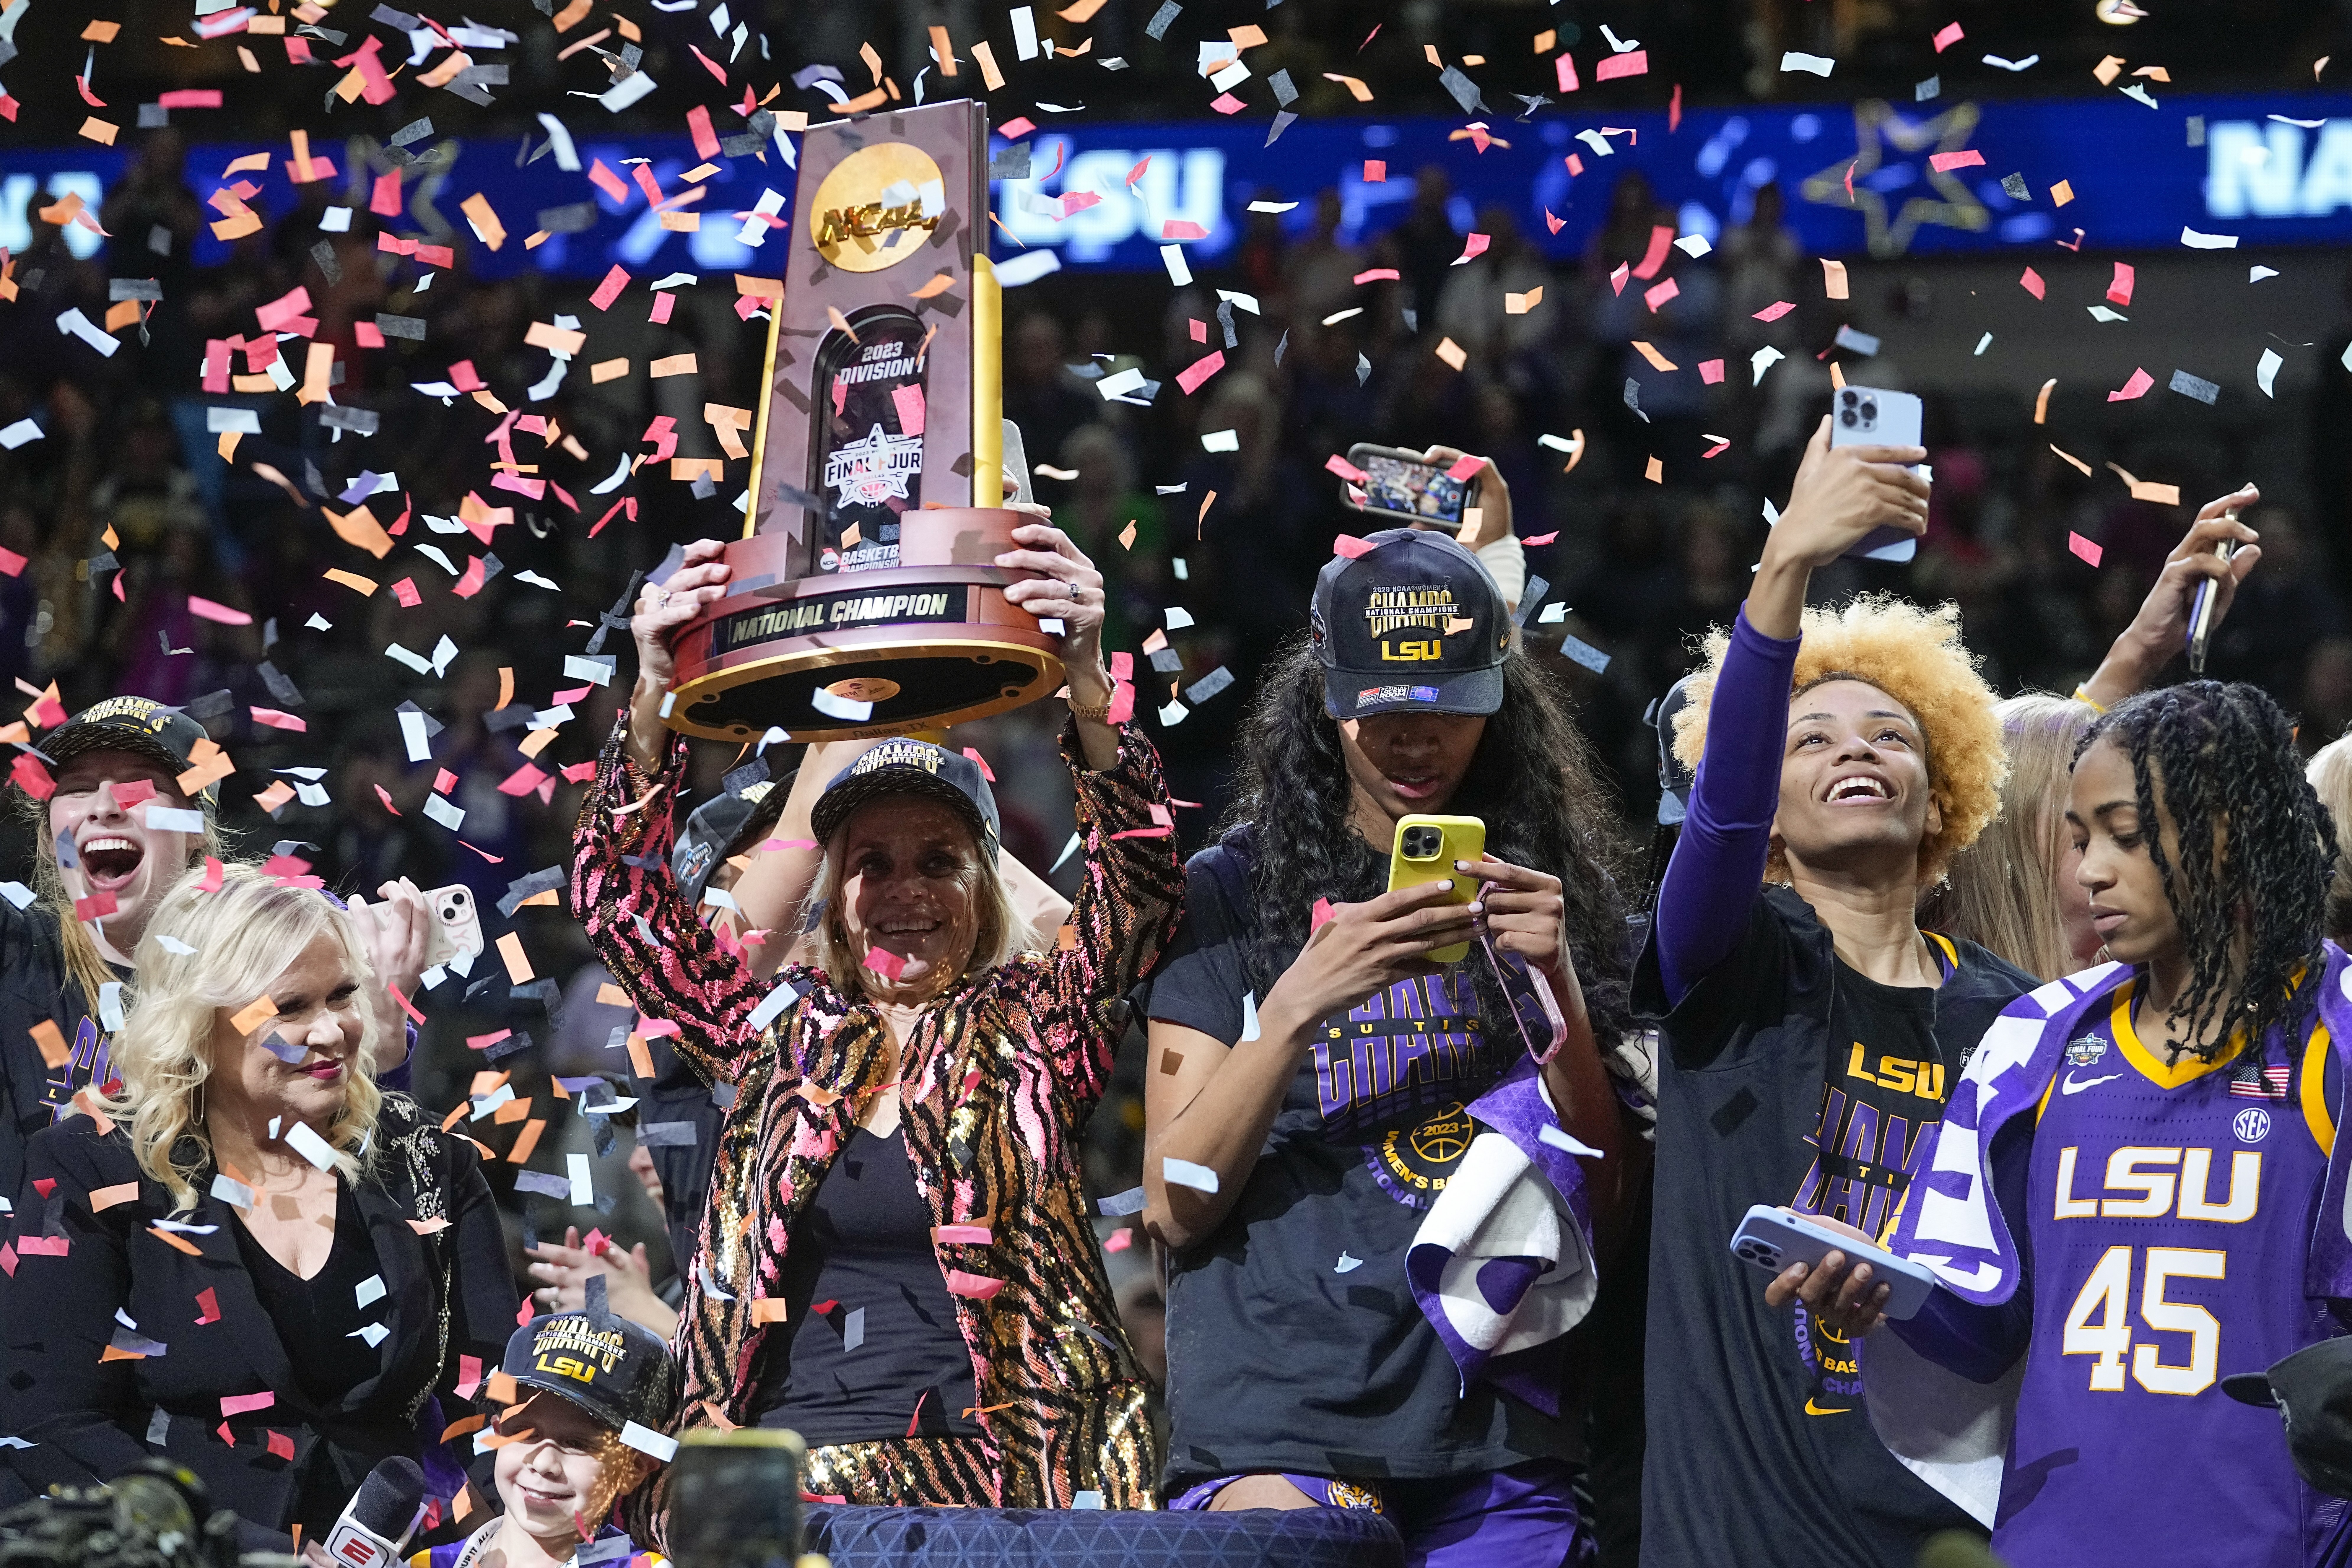 WINNER: Collecting championships is what LSU's new homegrown